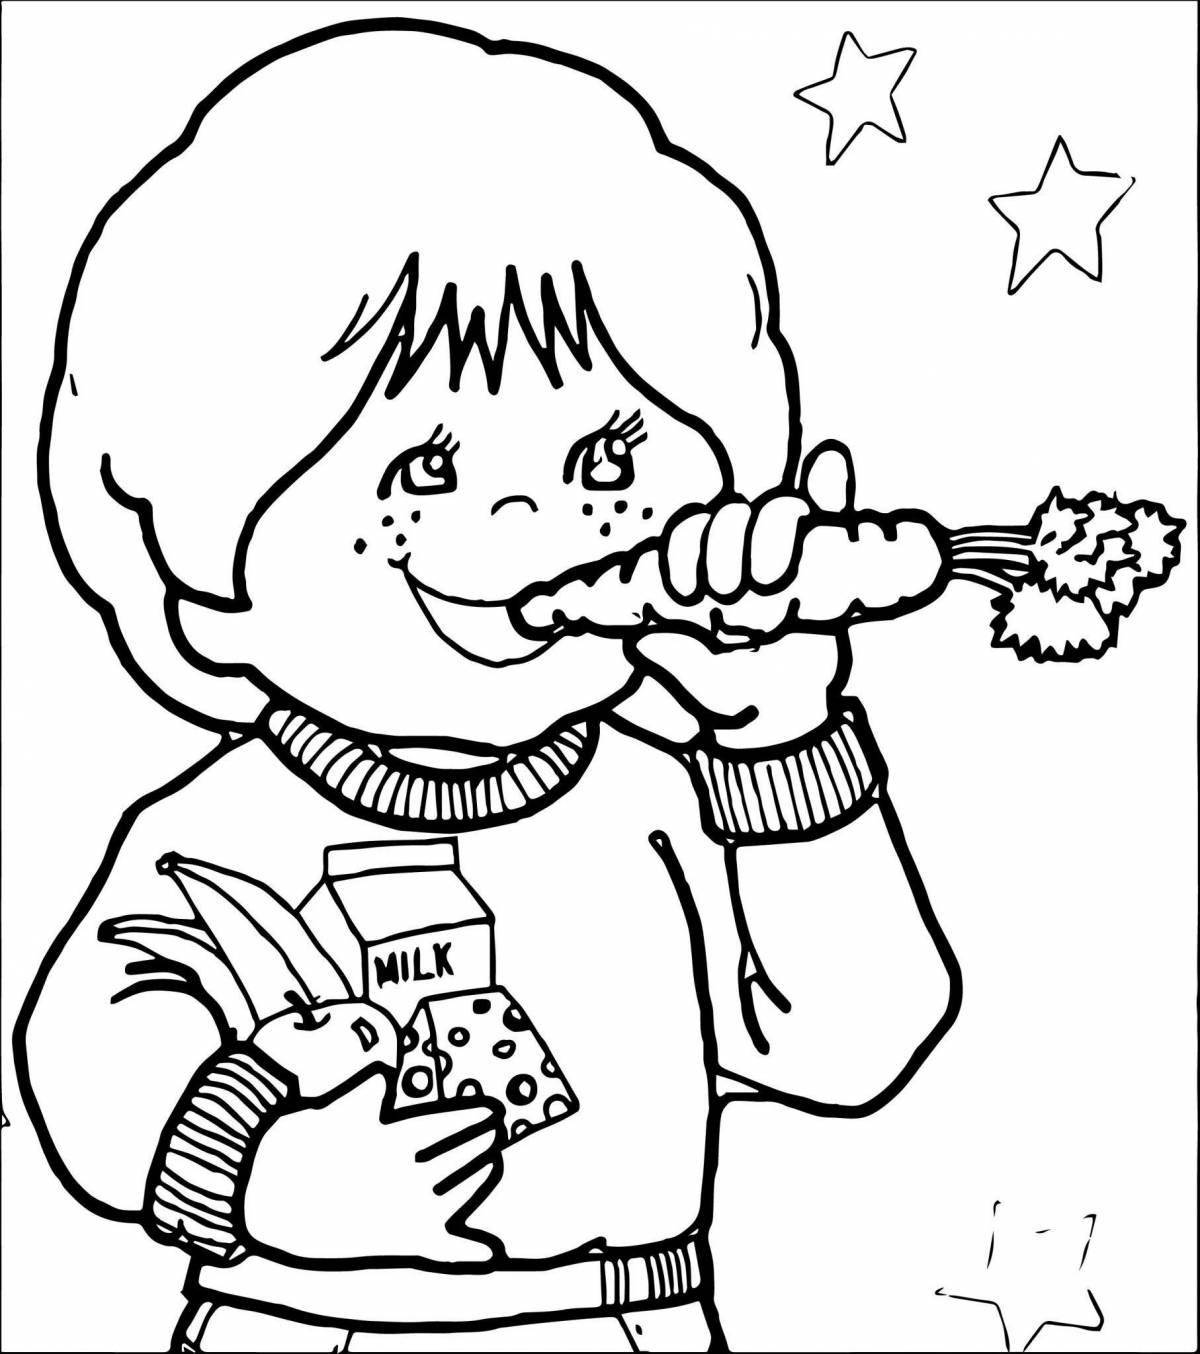 Coloring book about bad habits